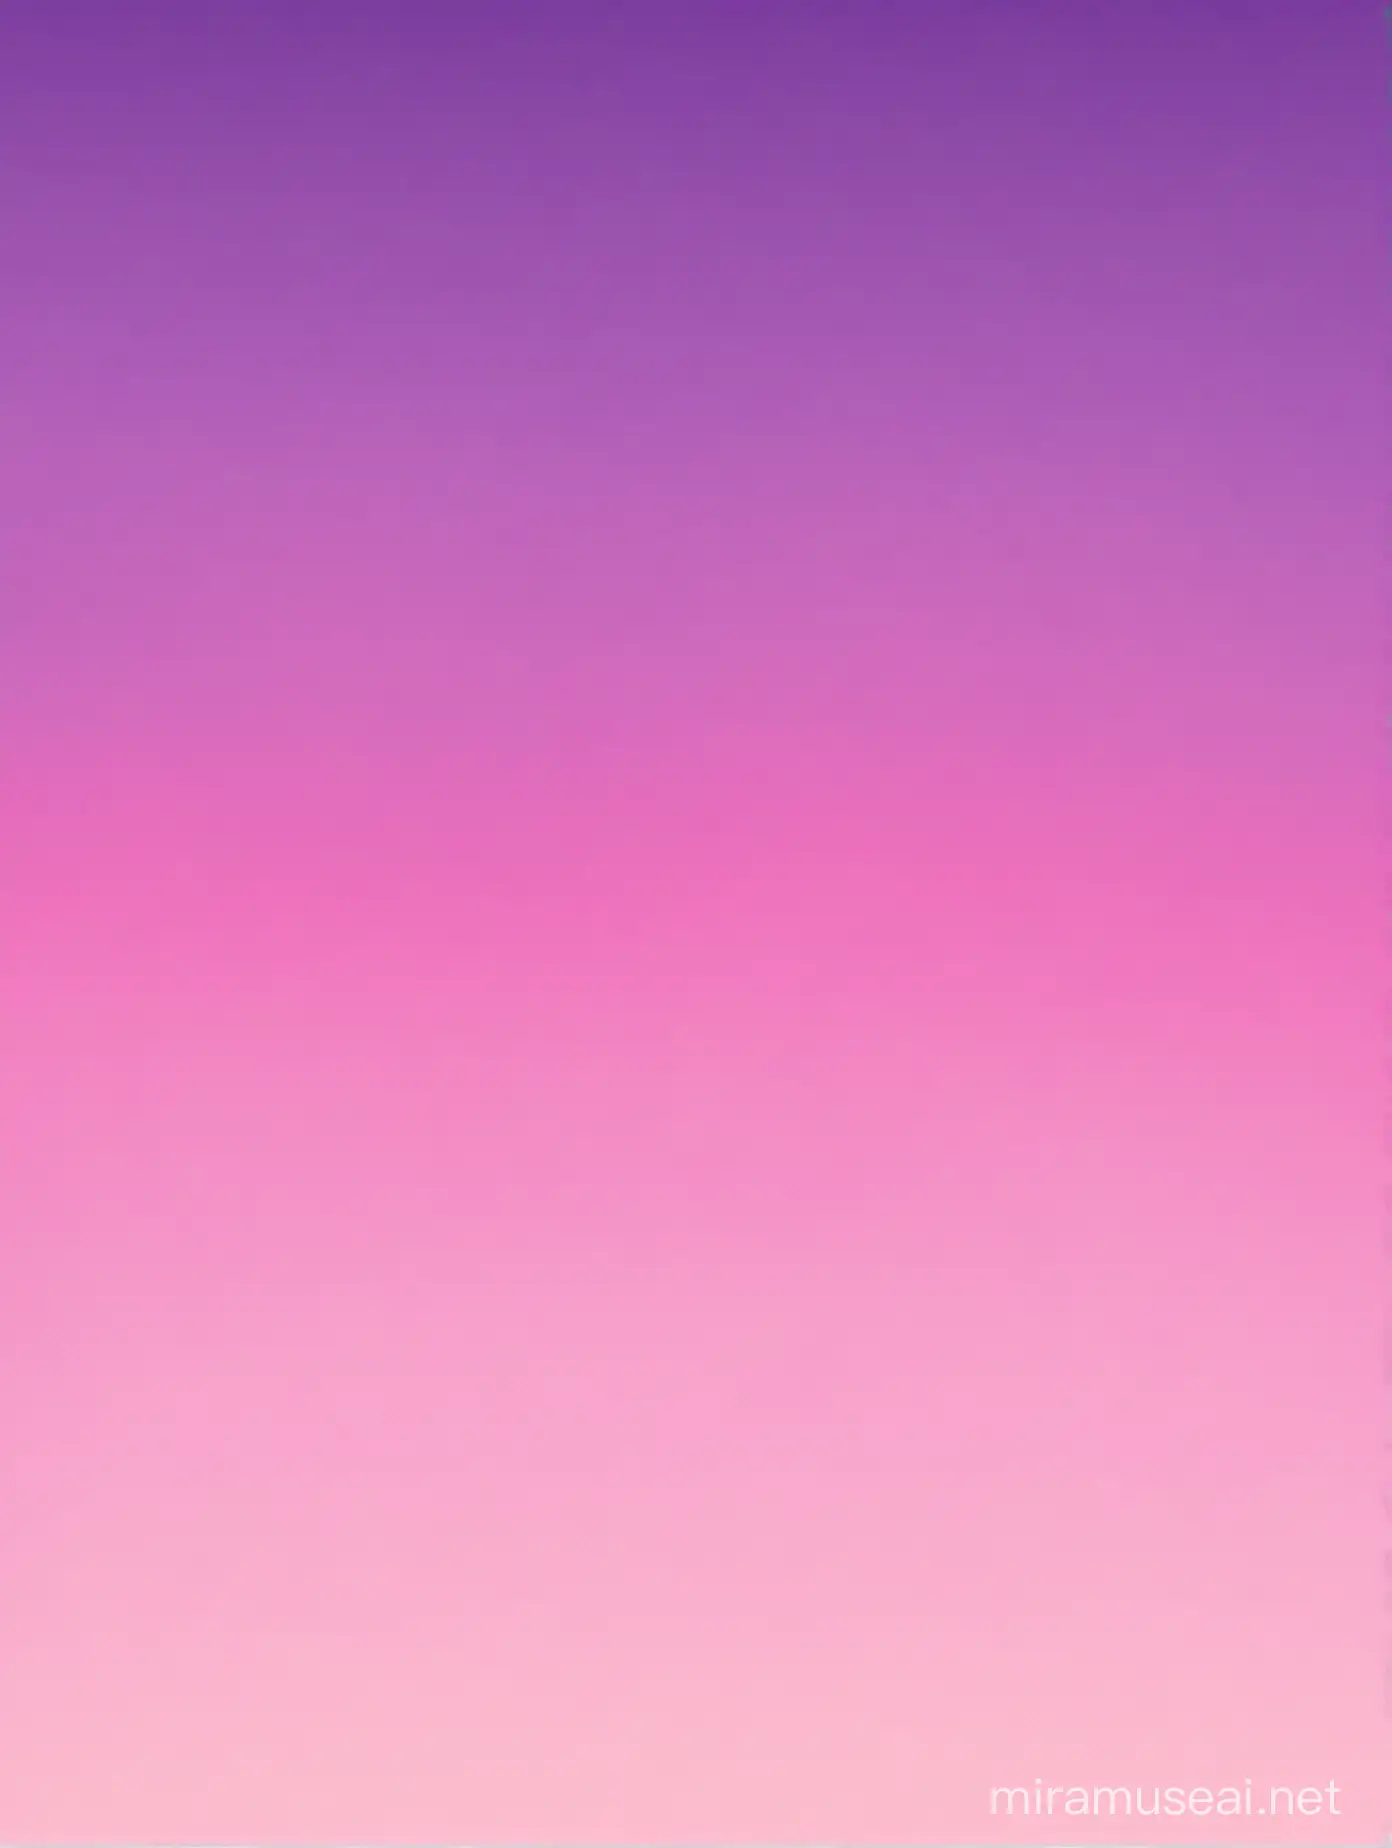 Purple and Pink Gradient Background